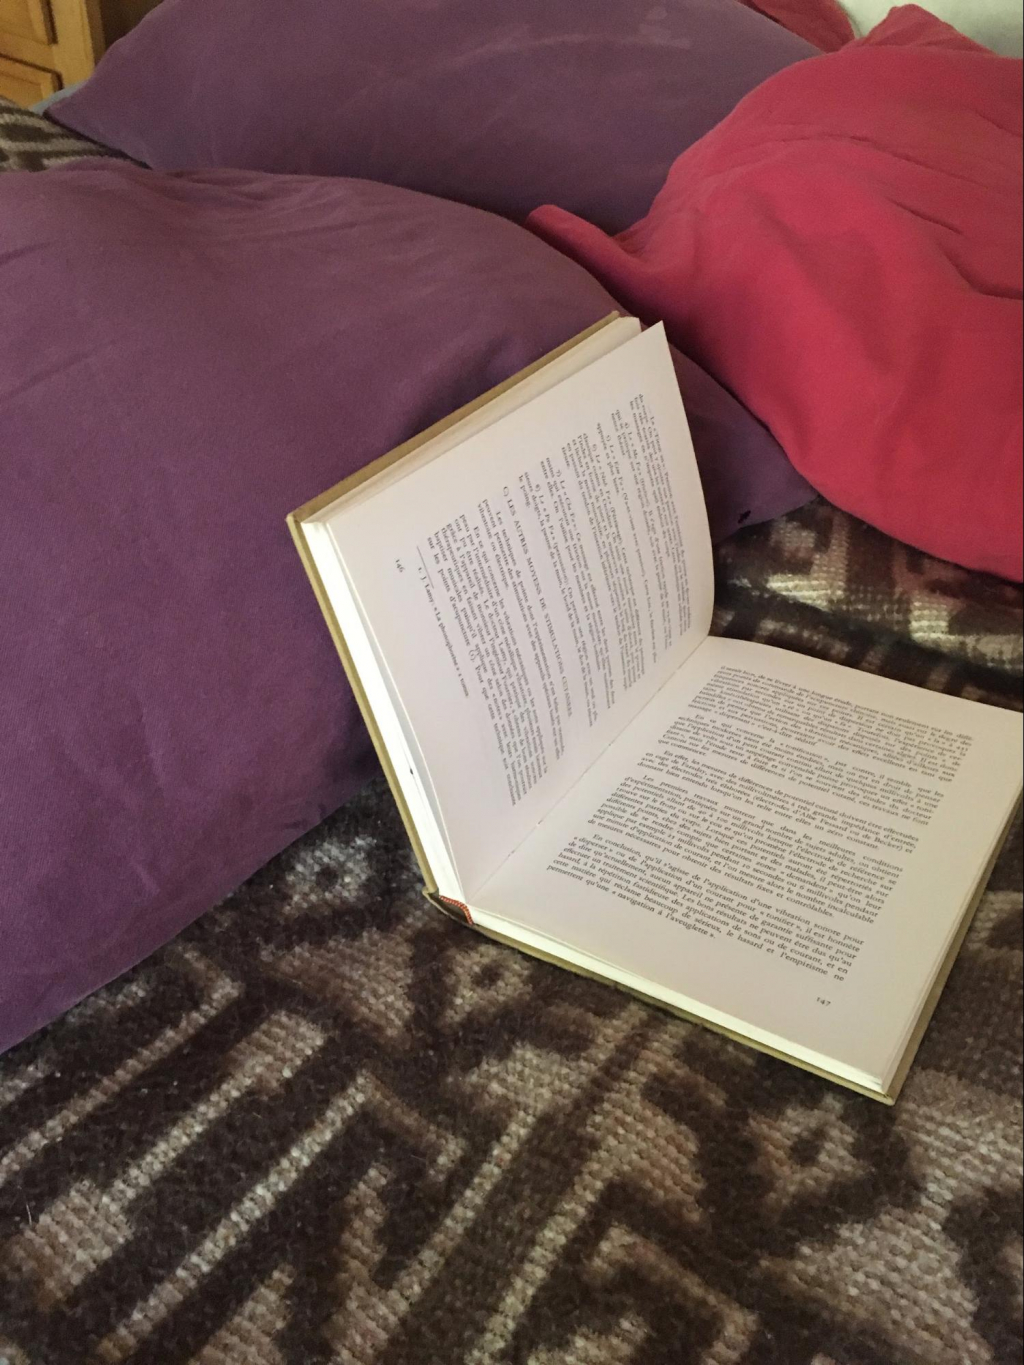 Book propped open against pillow